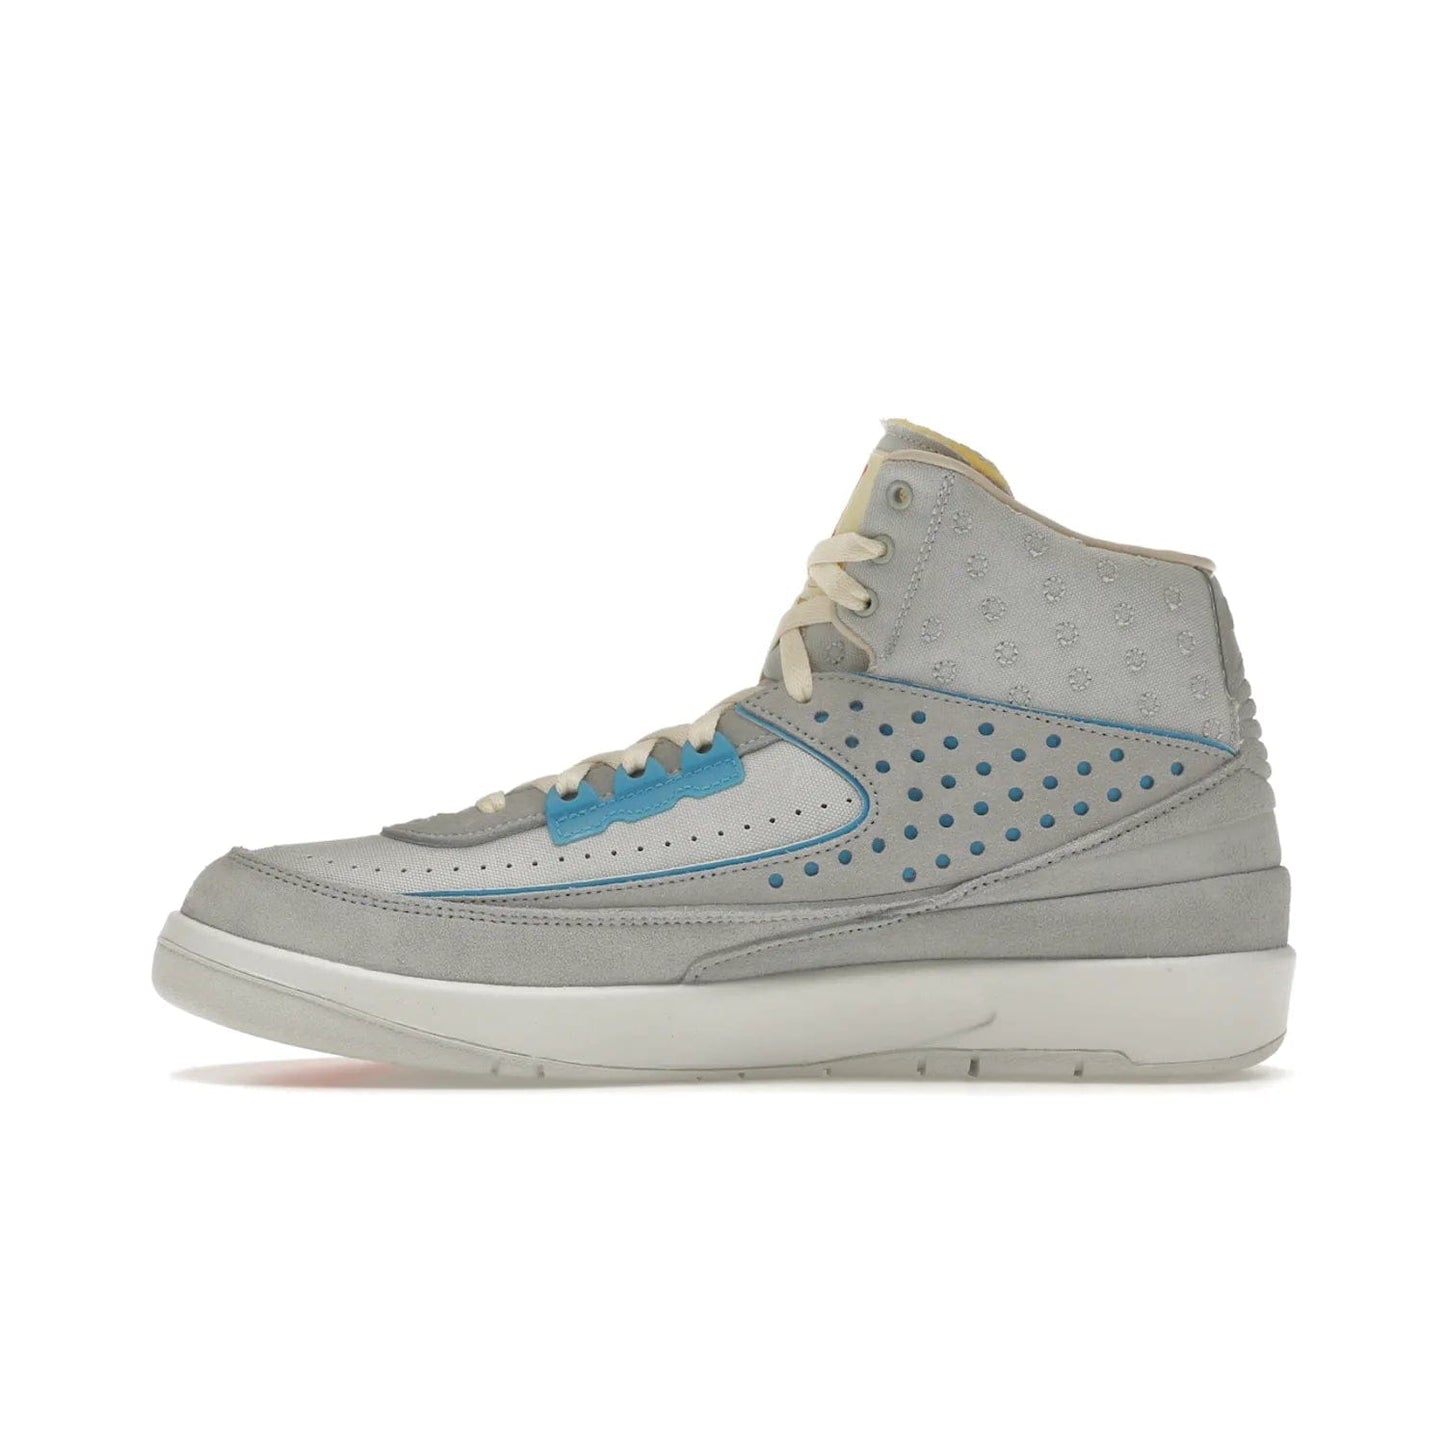 Jordan 2 Retro SP Union Grey Fog - Image 19 - Only at www.BallersClubKickz.com - Introducing the Air Jordan 2 Retro SP Union Grey Fog. This intricate sneaker design features a grey canvas upper with light blue eyelets, eyestay patches, and piping, plus custom external tags. Dropping in April 2022, this exclusive release offers a worn-in look and feel.